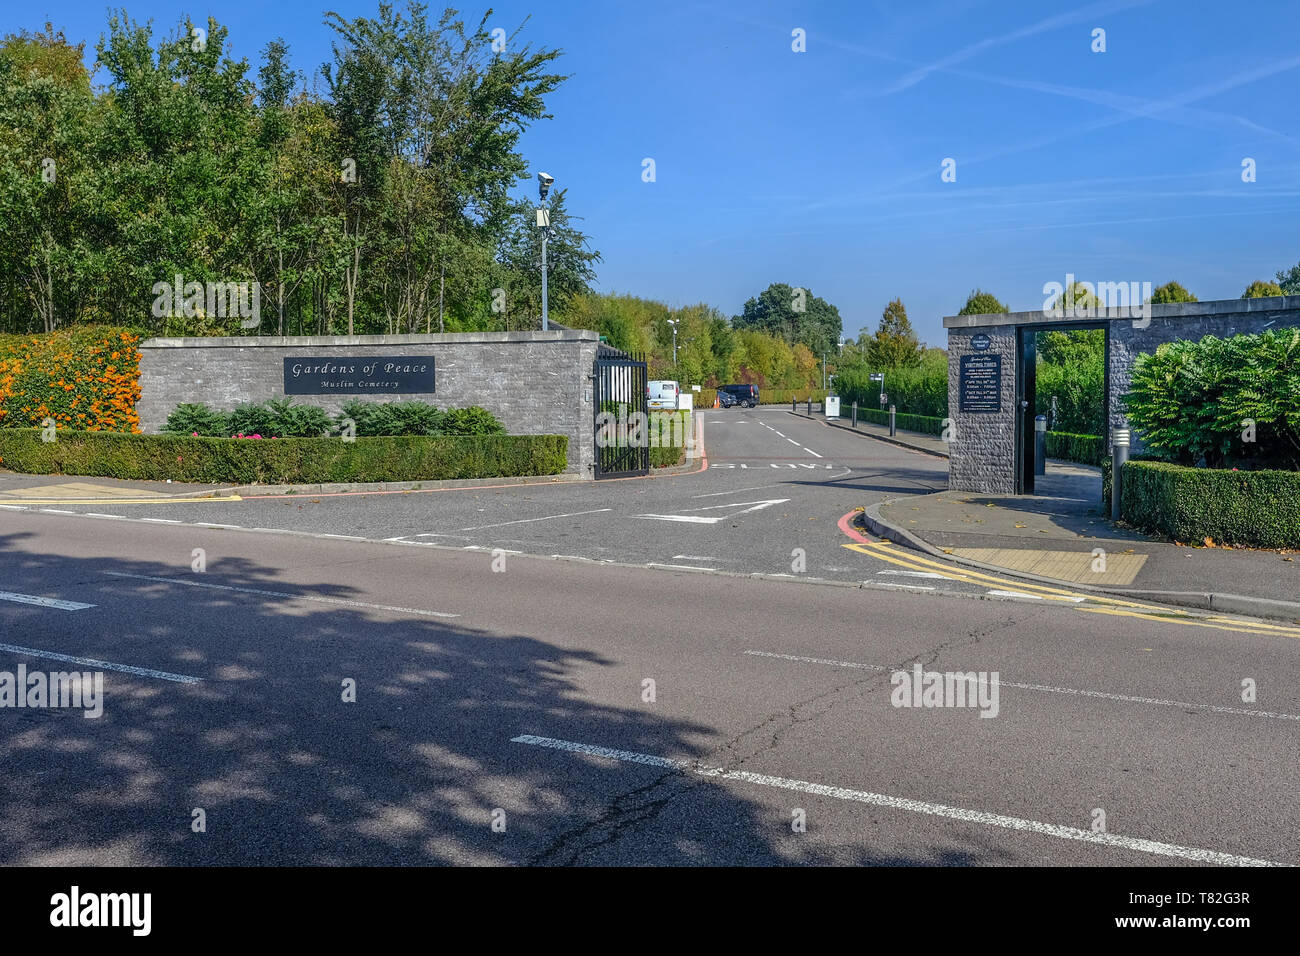 Hainault, Ilford, Essex, UK - October 5, 2018: View of entrance to the Gardens of Peace Muslim Cemetery in Elmbridge Road. Stock Photo